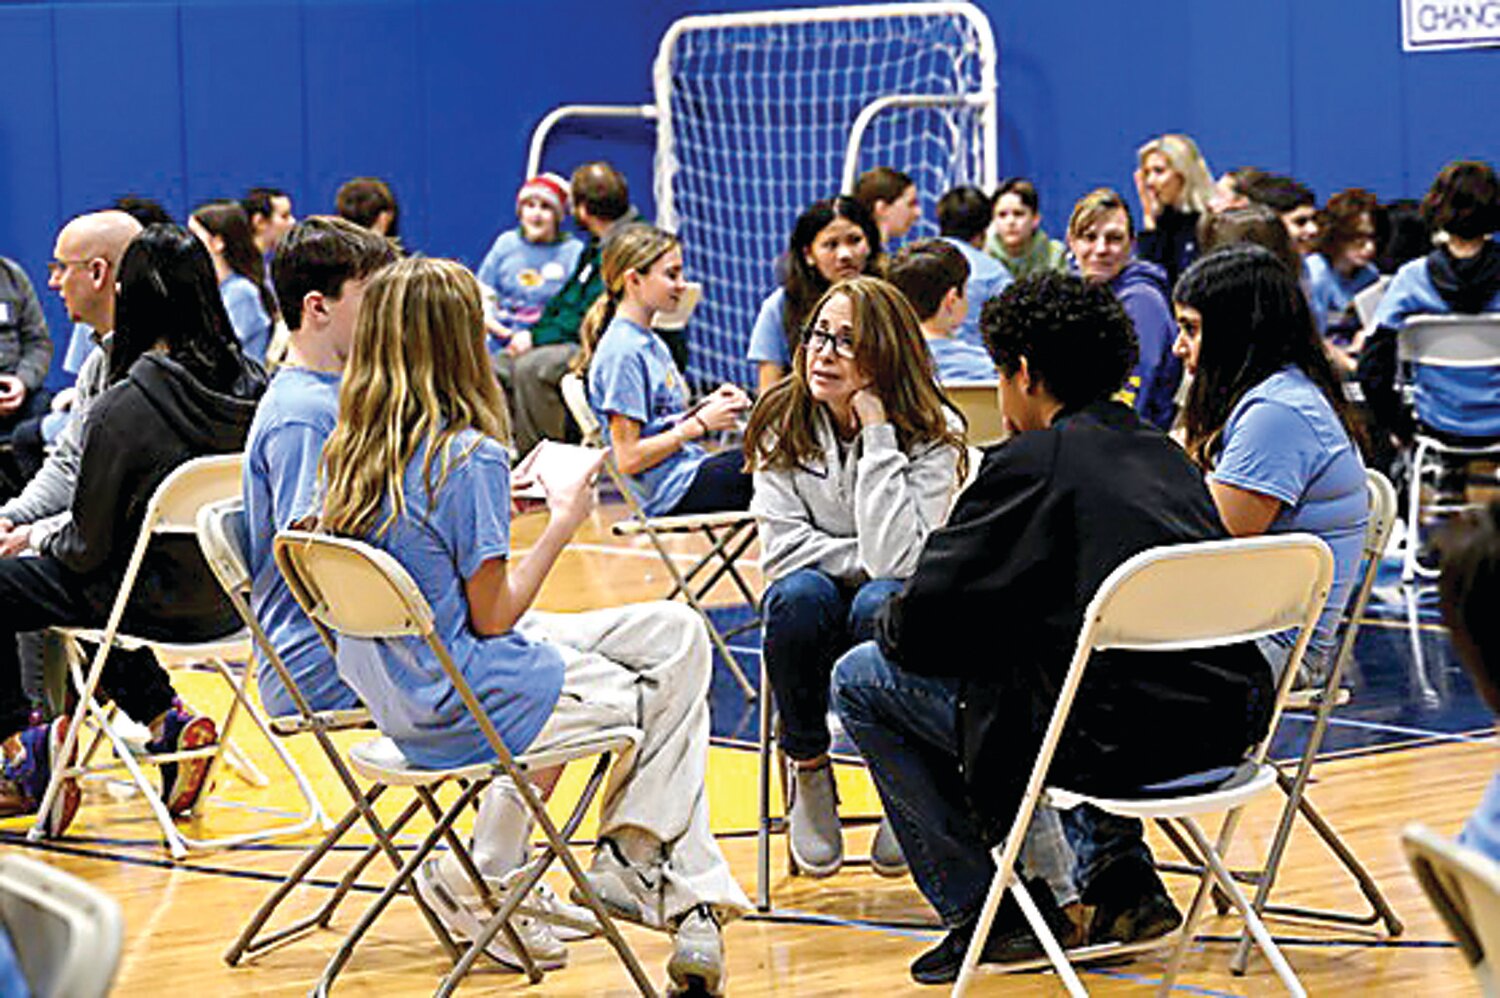 New Hope-Solebury Middle School’s Challenge Day consisted of large and small group activities for students, teachers, and staff.